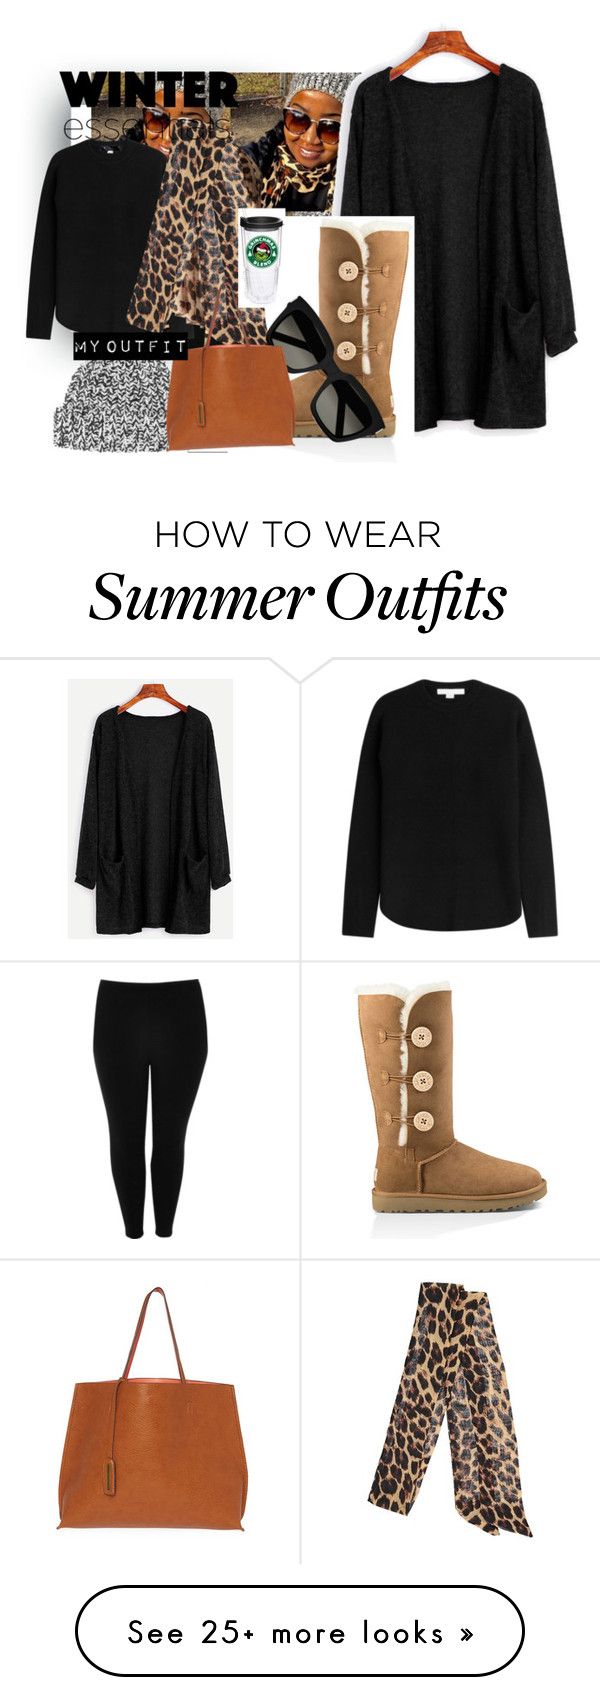 "Literally my outfit yesterday!" by naturallydee on Polyvore featuring...